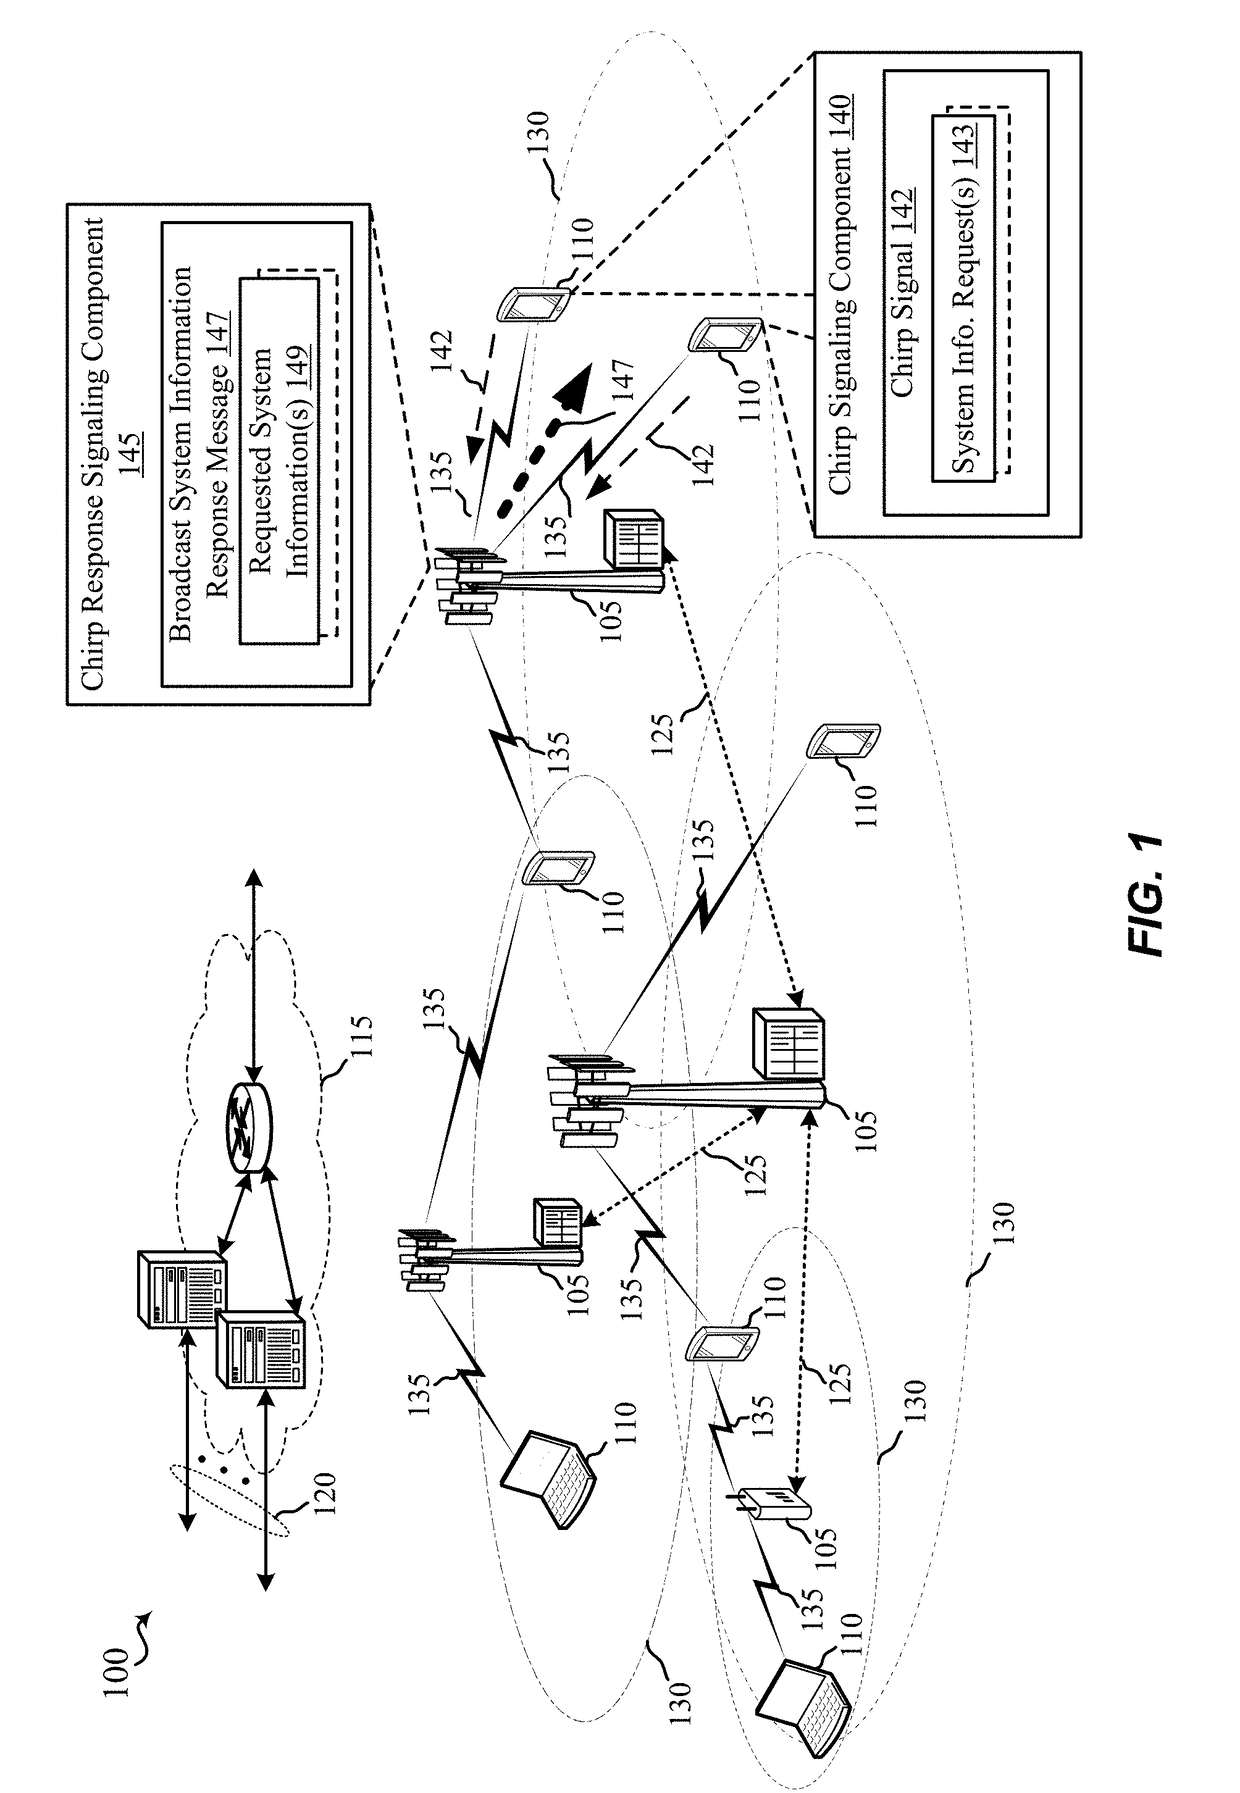 Cooperative group broadcasting of on-demand system information